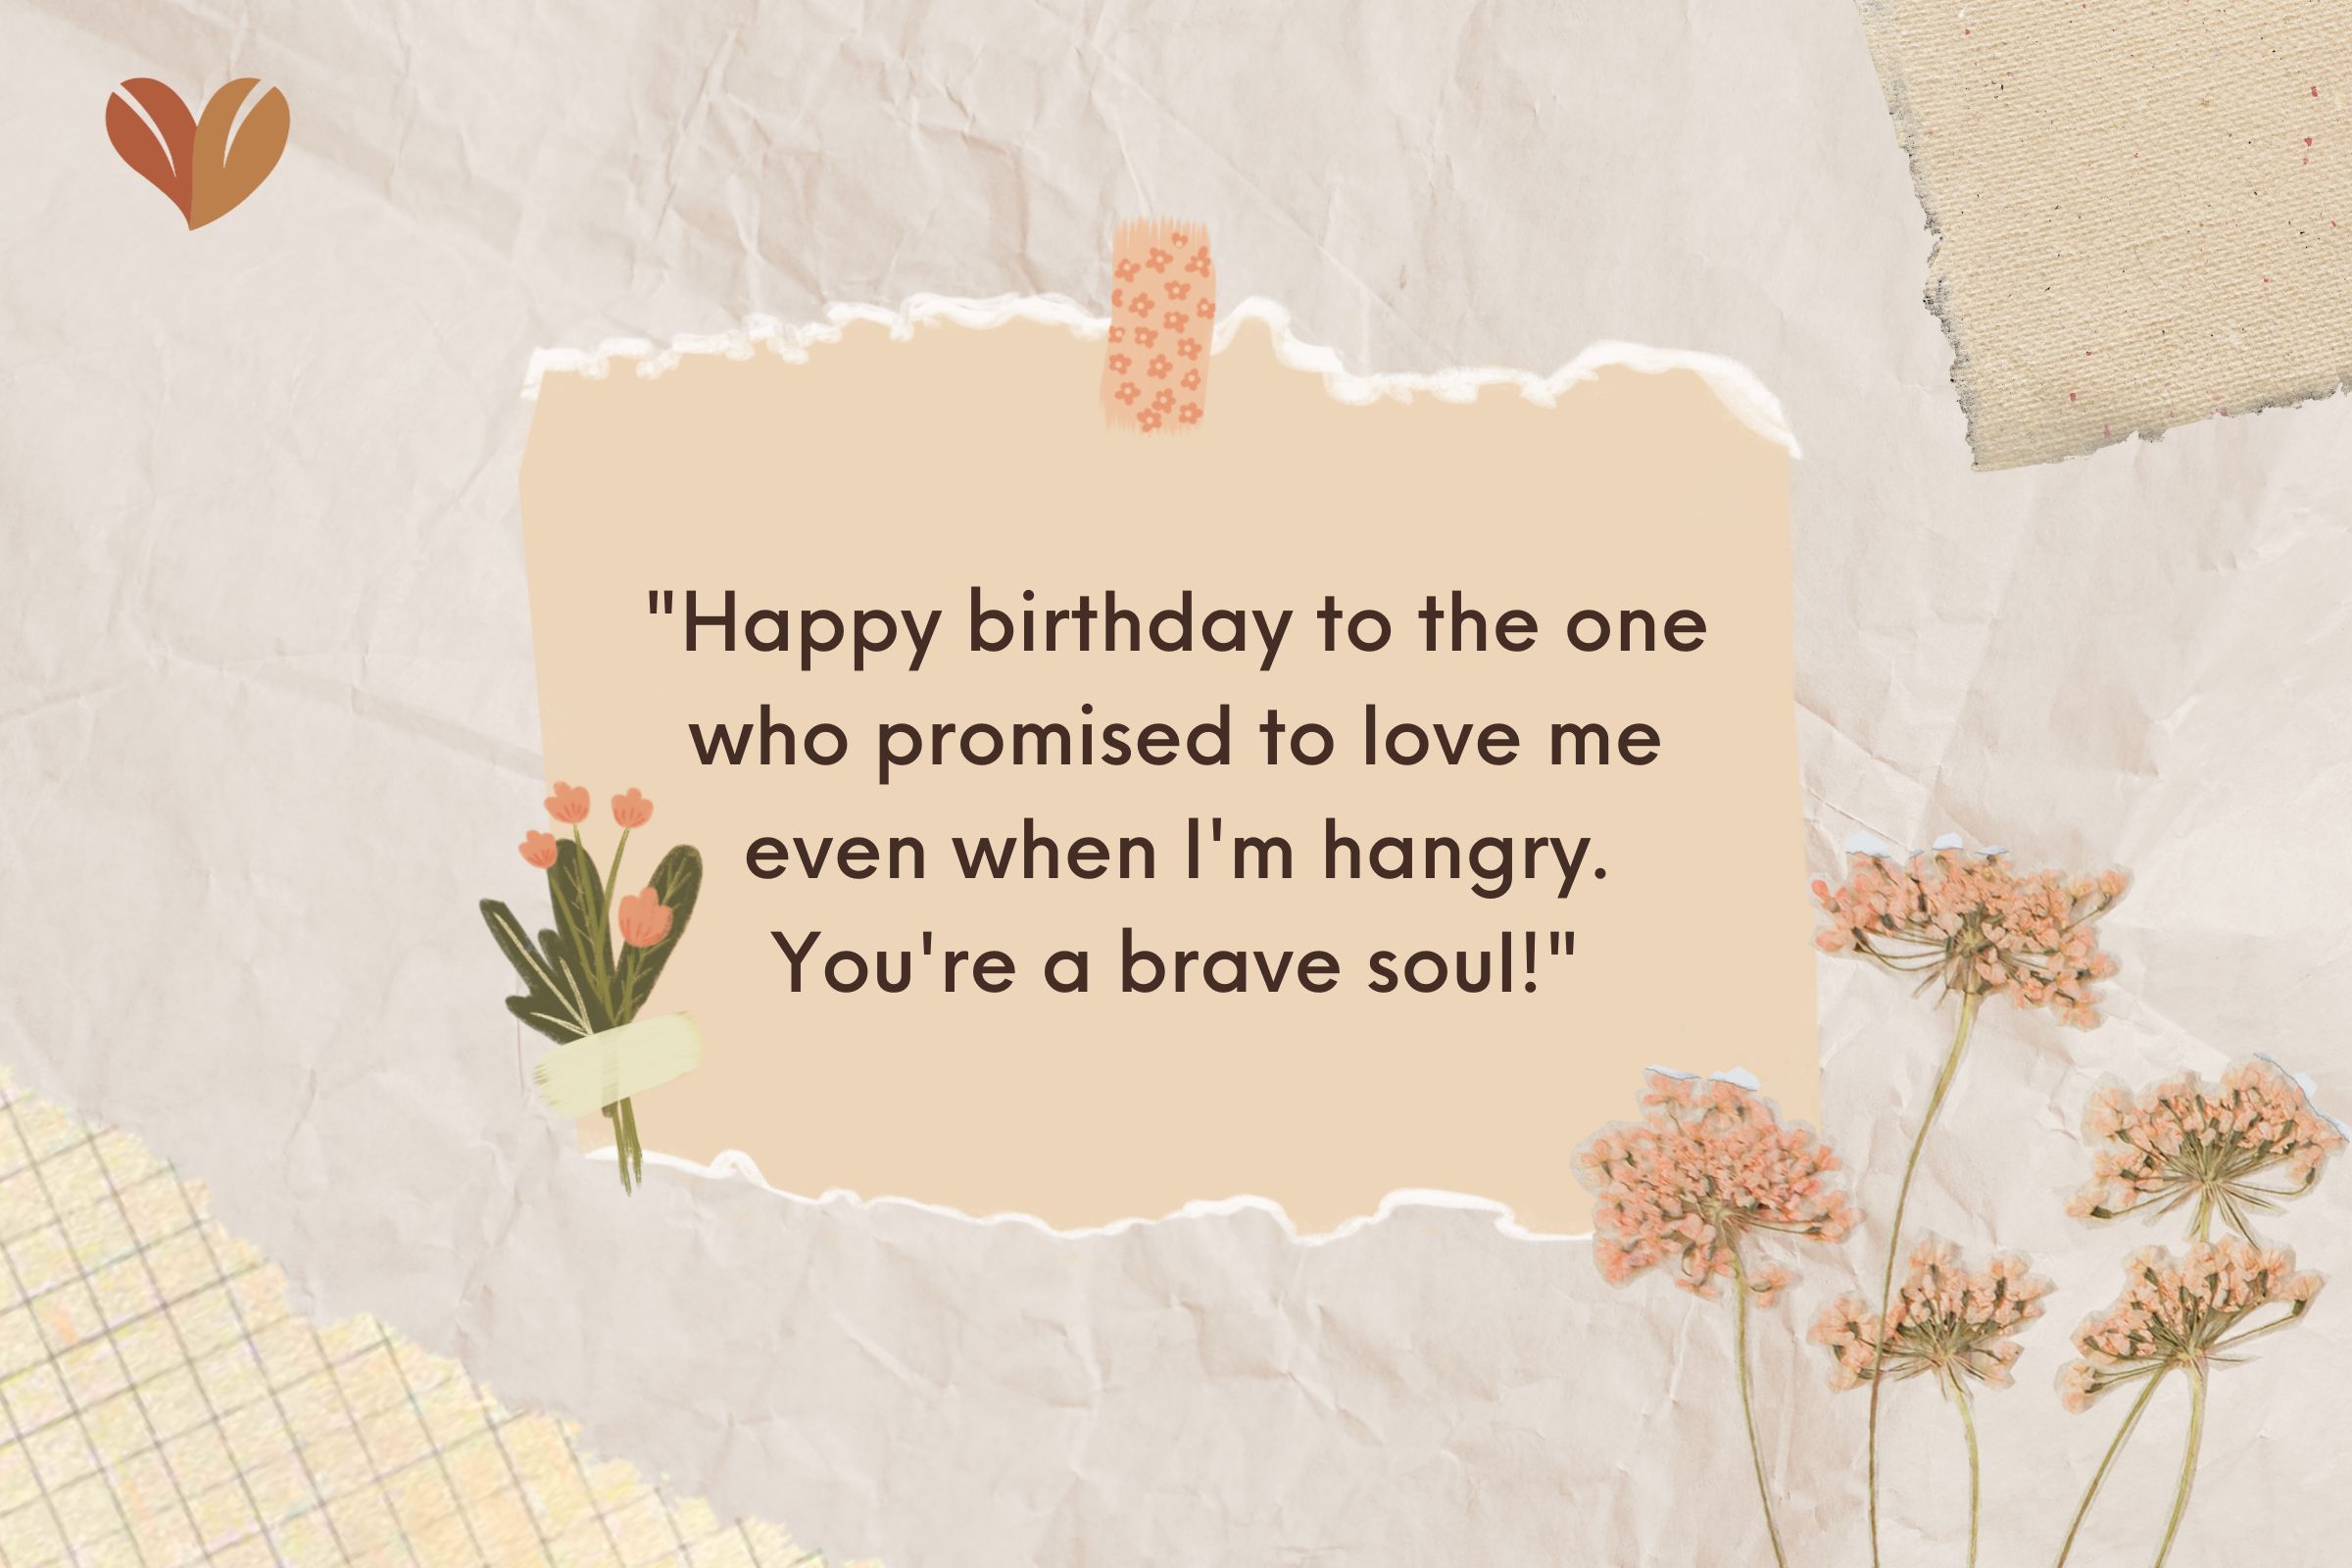 "Happy birthday to the one who promised to love me even when I'm hangry. You're a brave soul!"